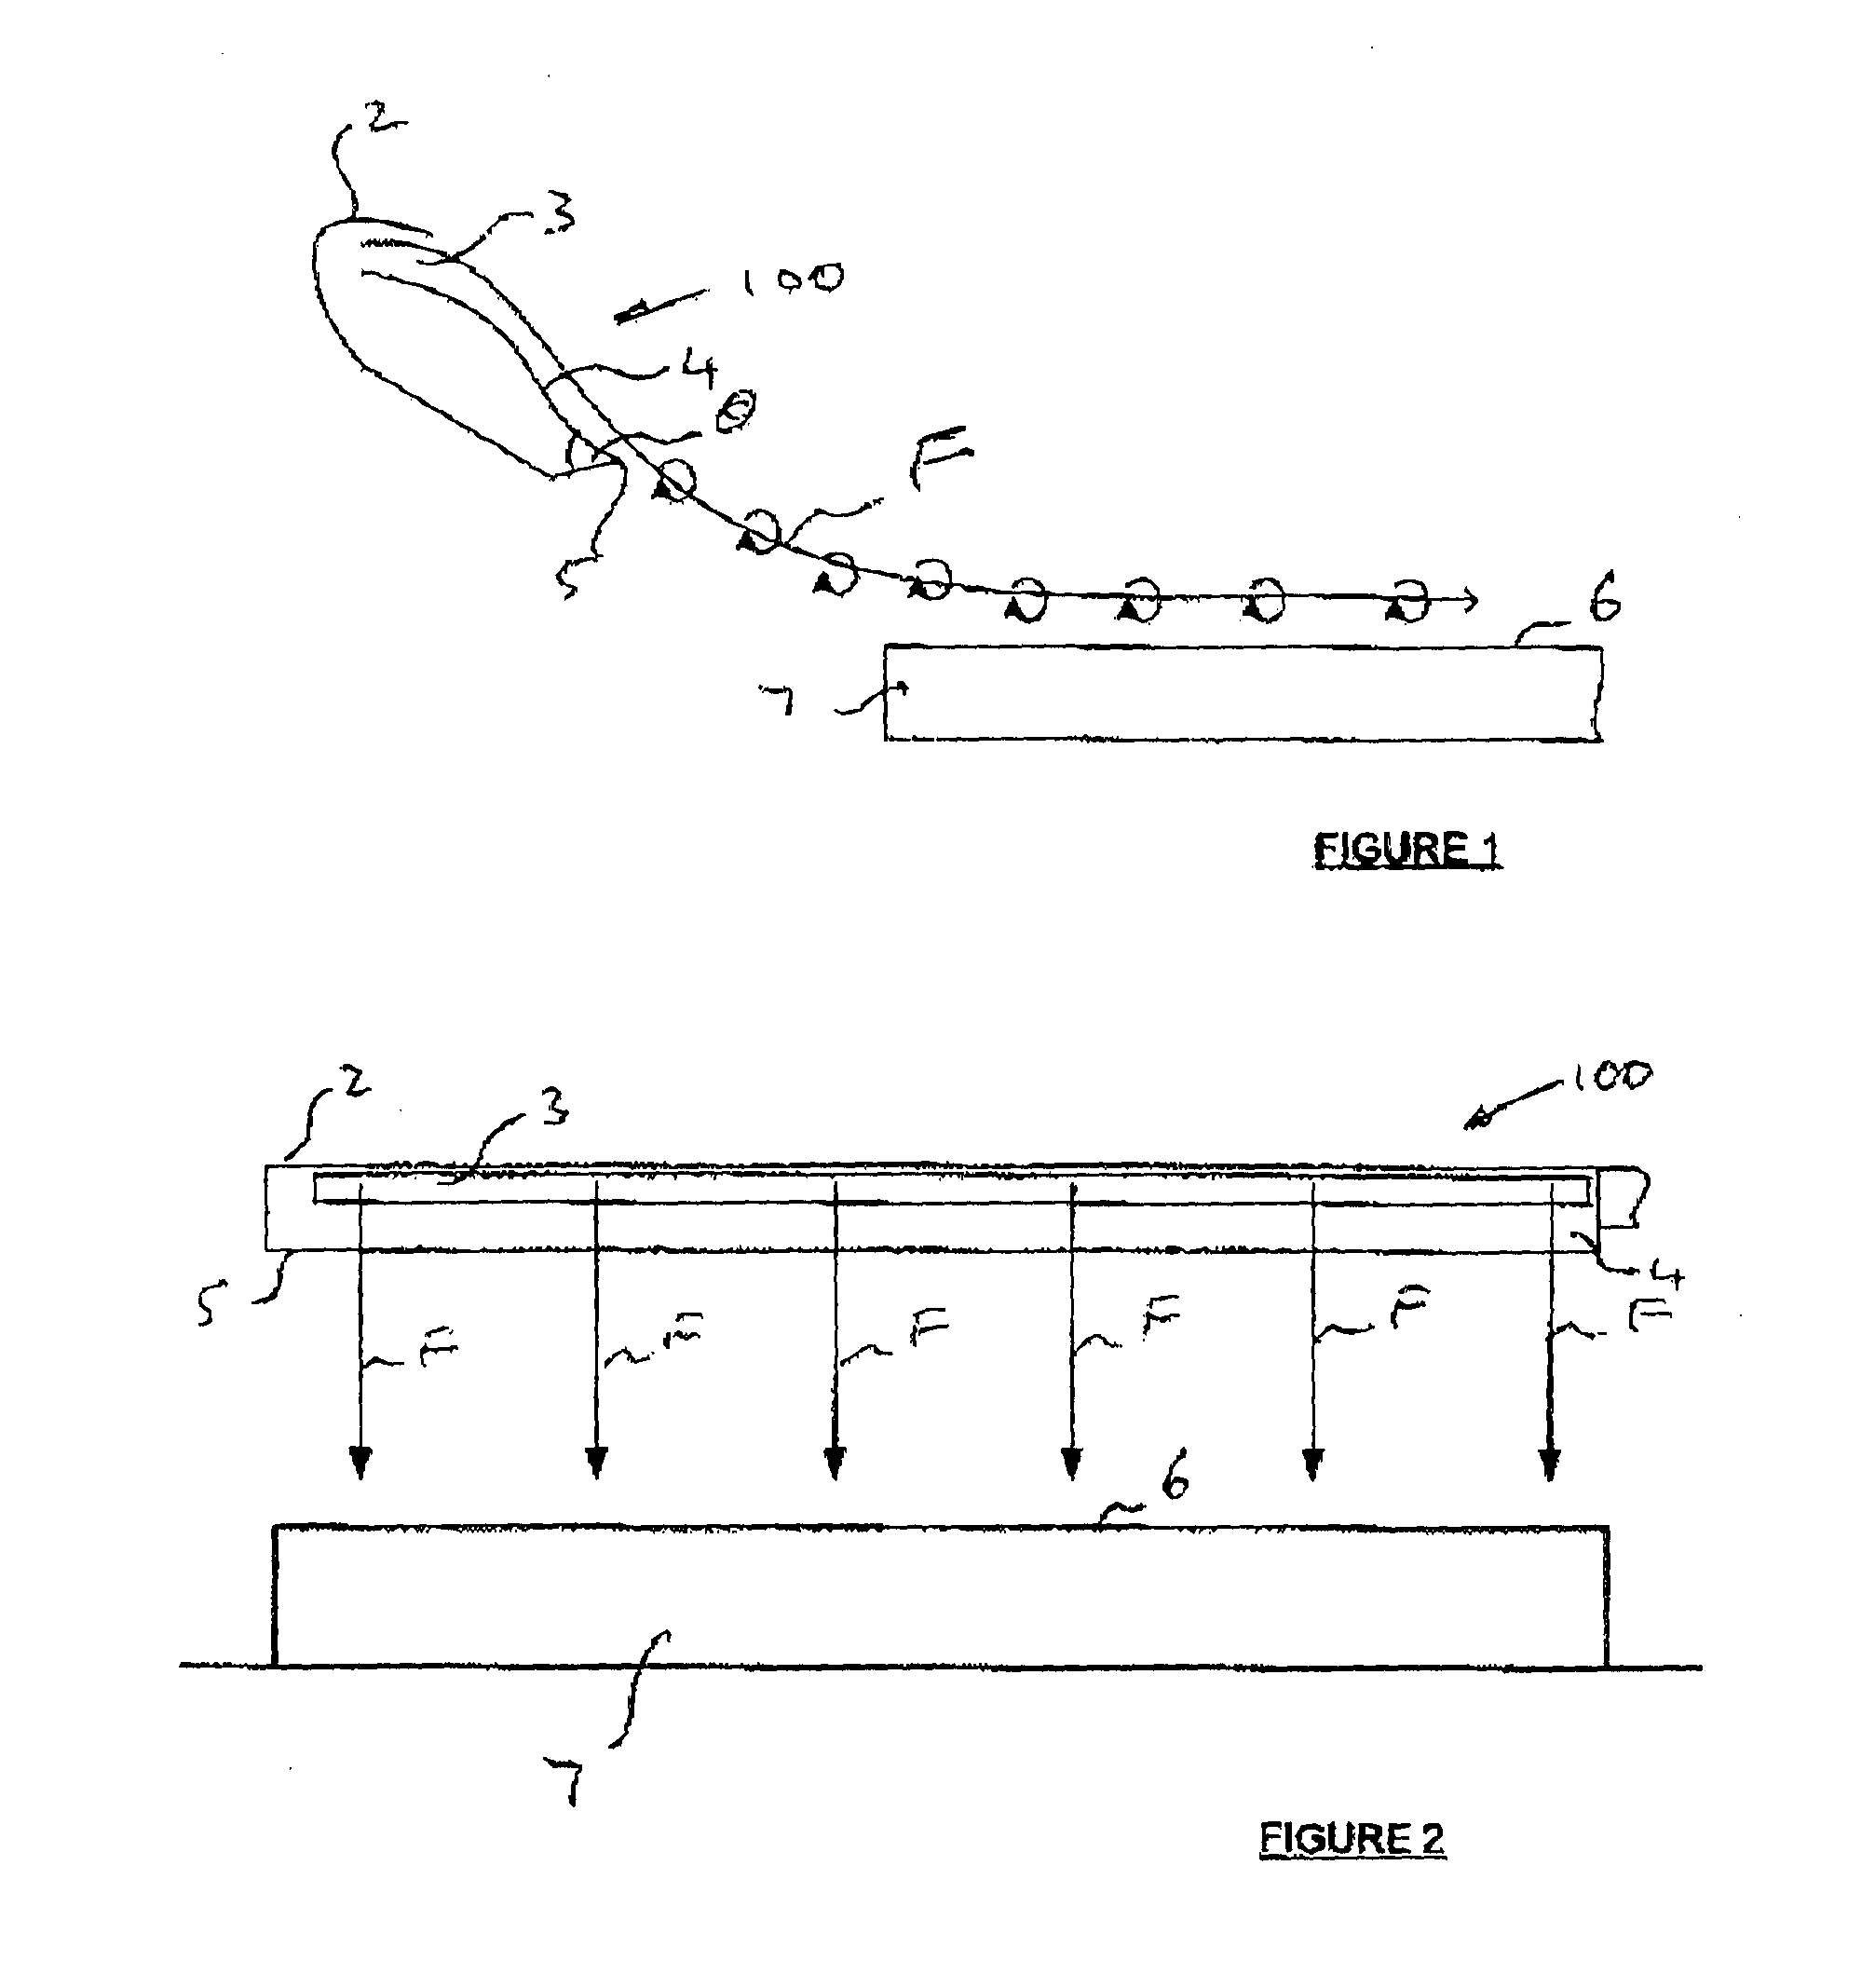 Inductive power transfer system and method